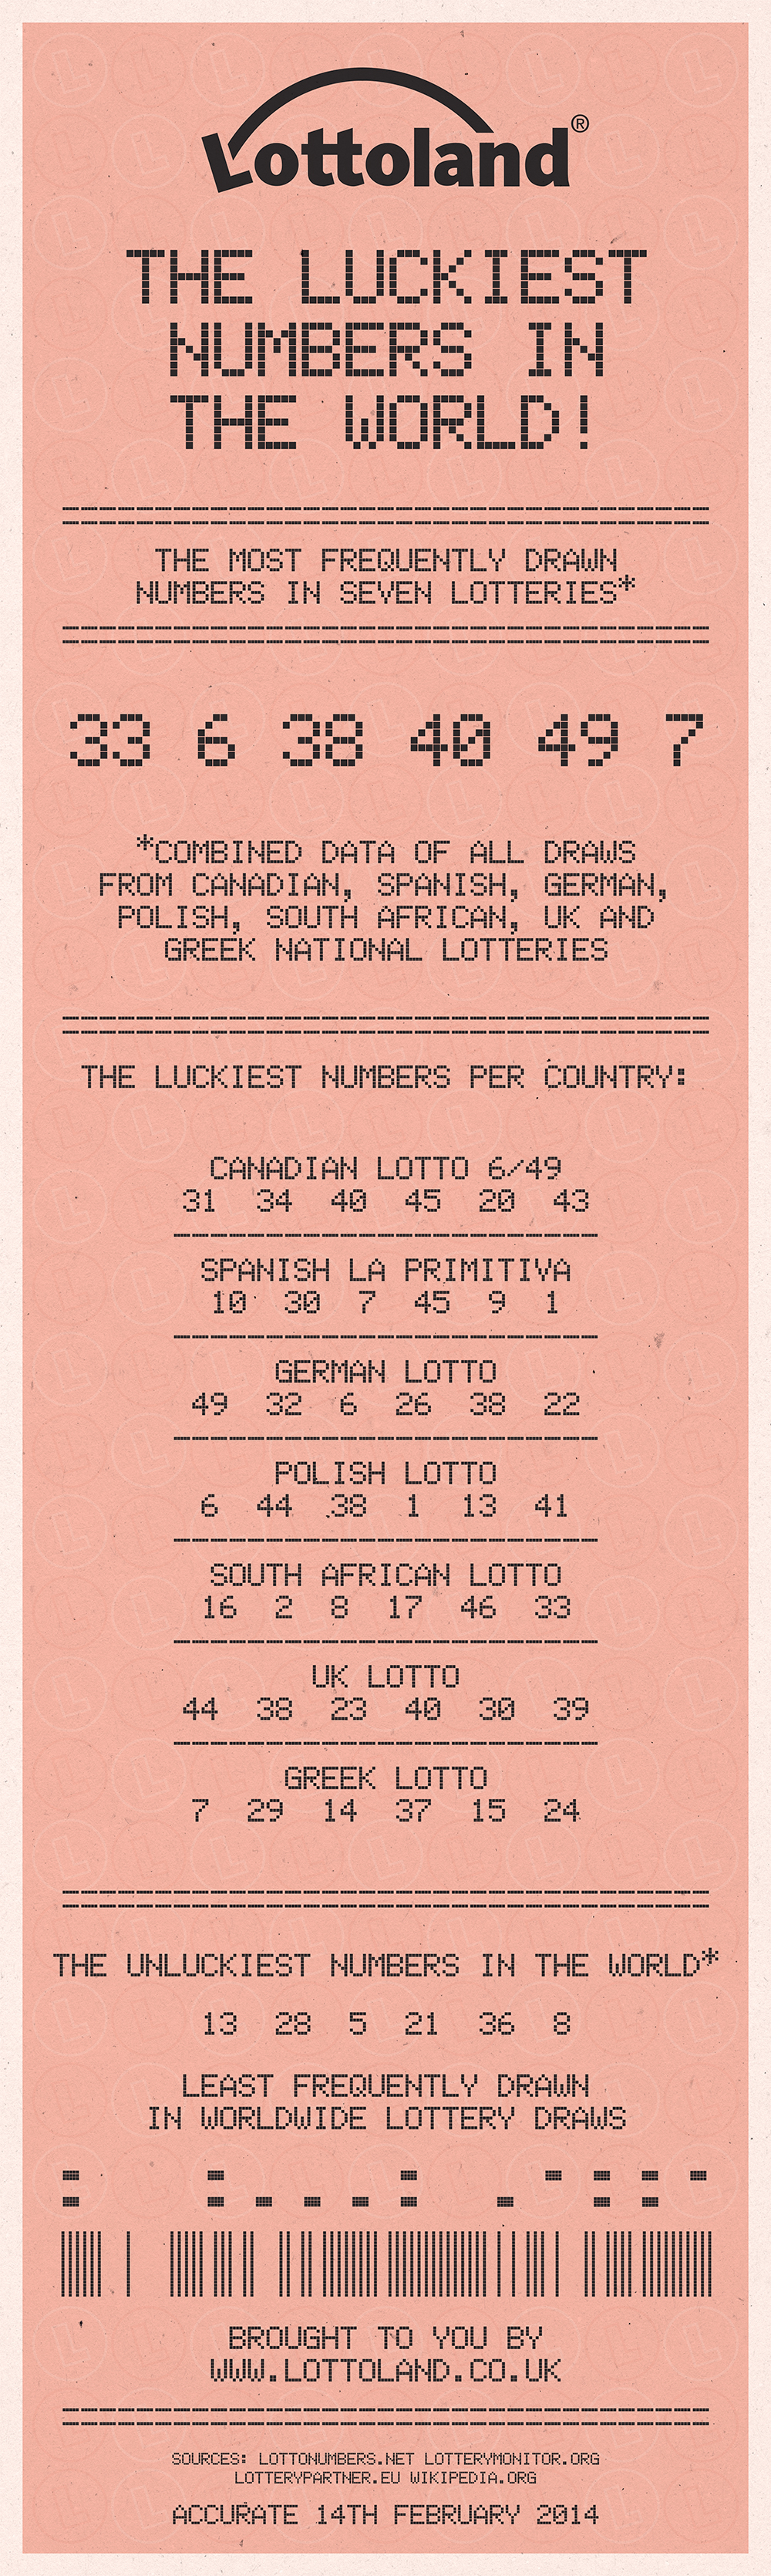 The world’s luckiest lottery numbers